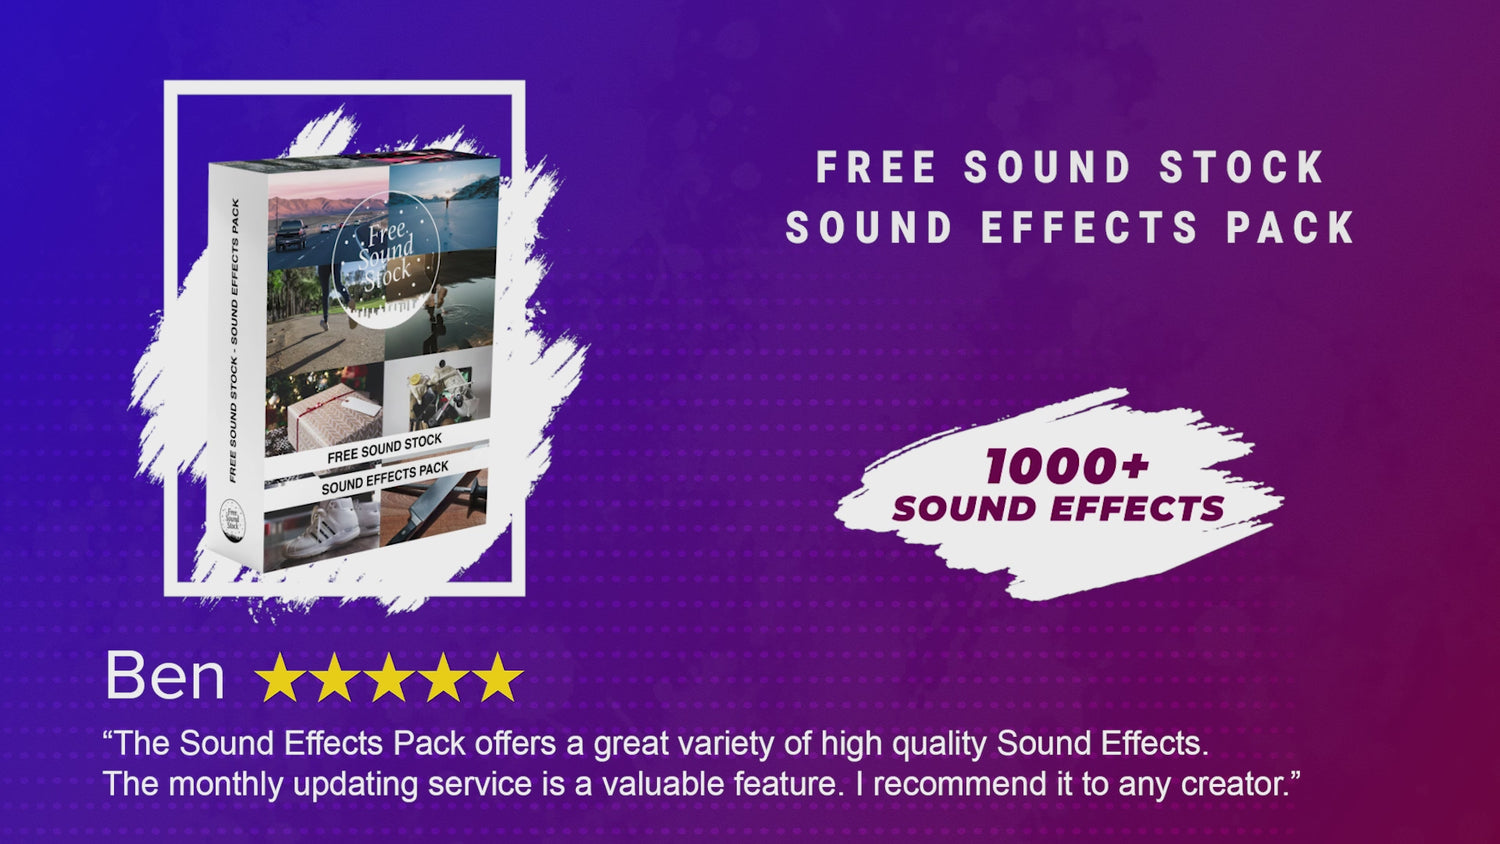 Fanatical] Essential Game Sounds Royalty Free Bundle (10 for £3.85